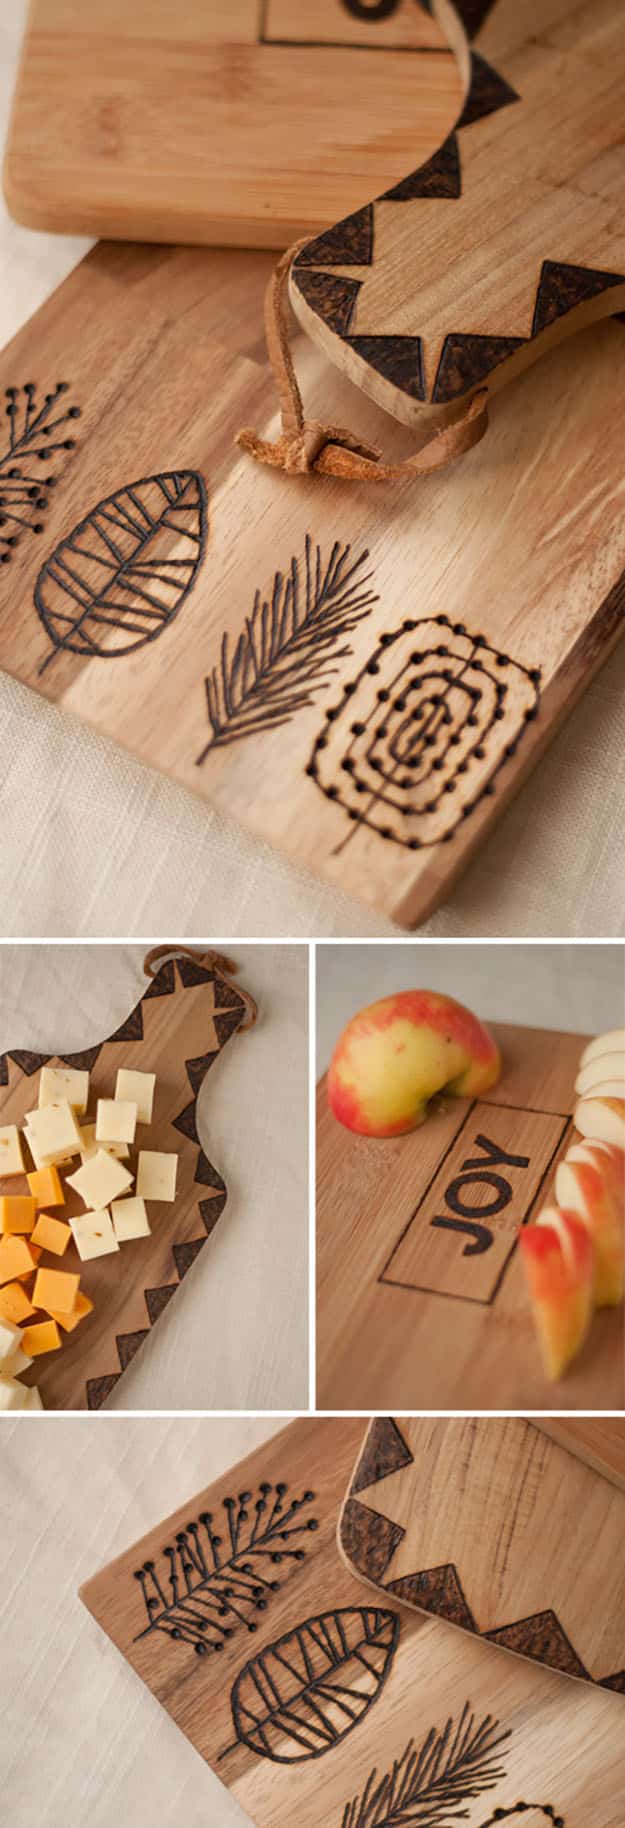 DIY Gifts for Friends & Family | DIY Kitchen Ideas | Etched Wooden Cutting Boards | DIY Projects & Crafts by DIY JOY#diygifts #christmas #diy #gifts